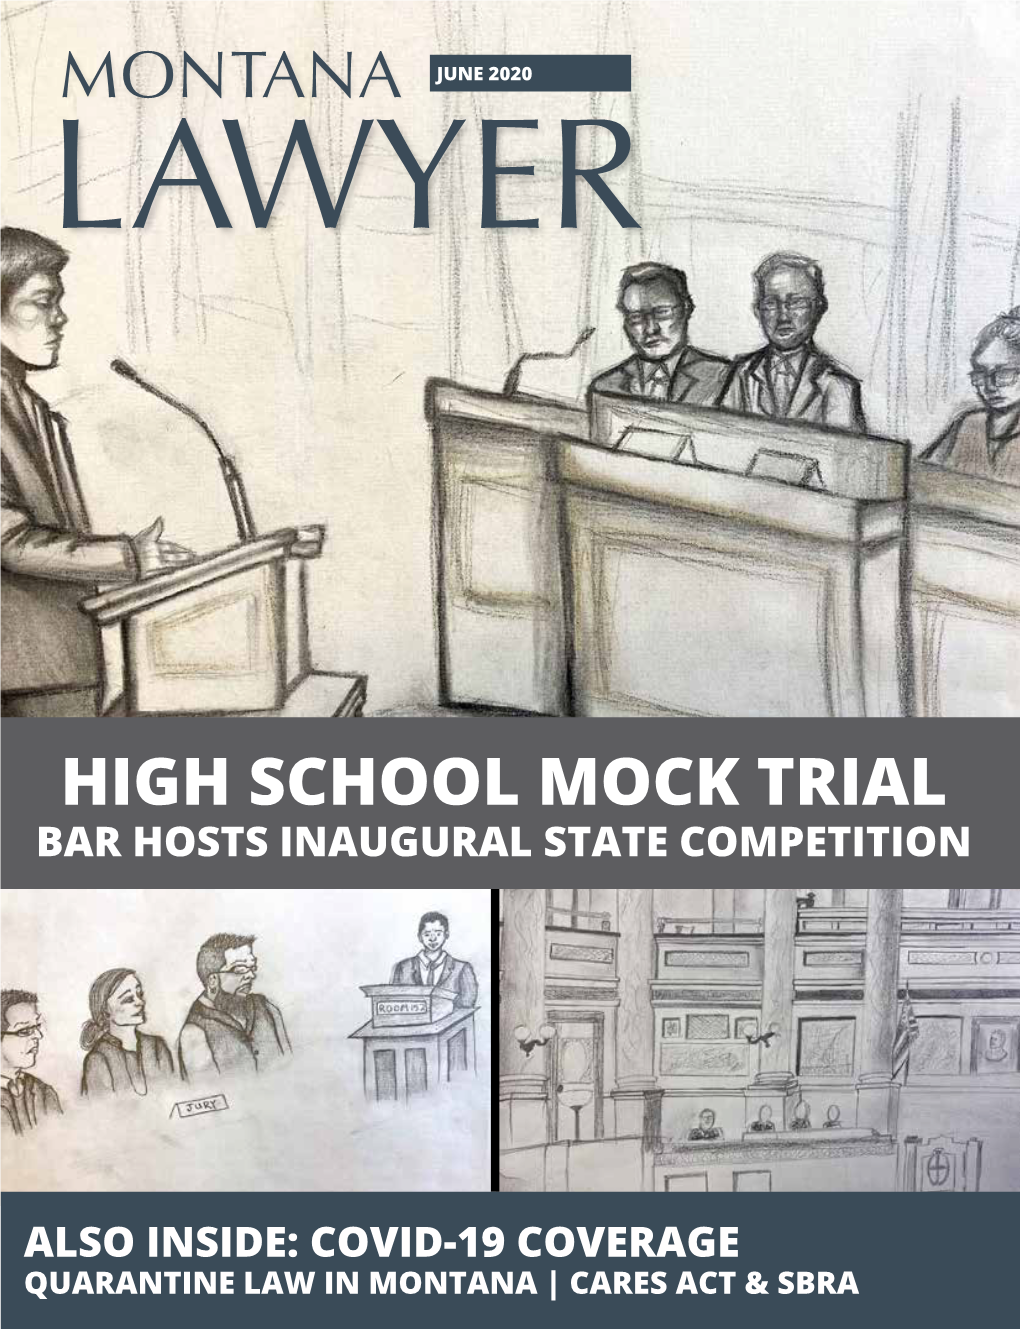 High School Mock Trial Bar Hosts Inaugural State Competition